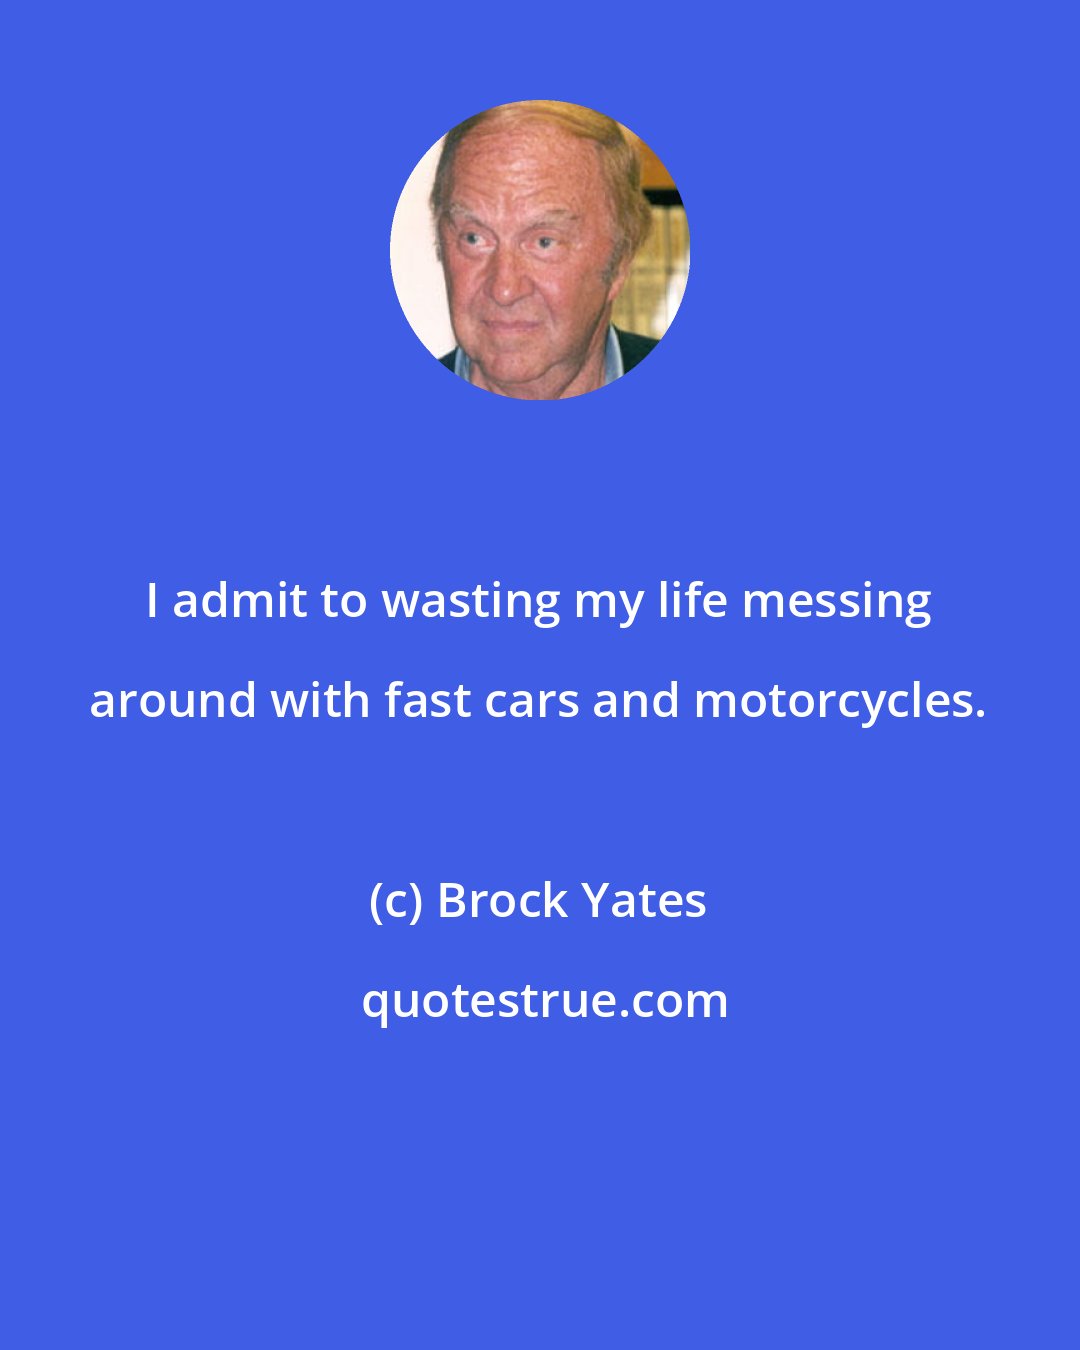 Brock Yates: I admit to wasting my life messing around with fast cars and motorcycles.